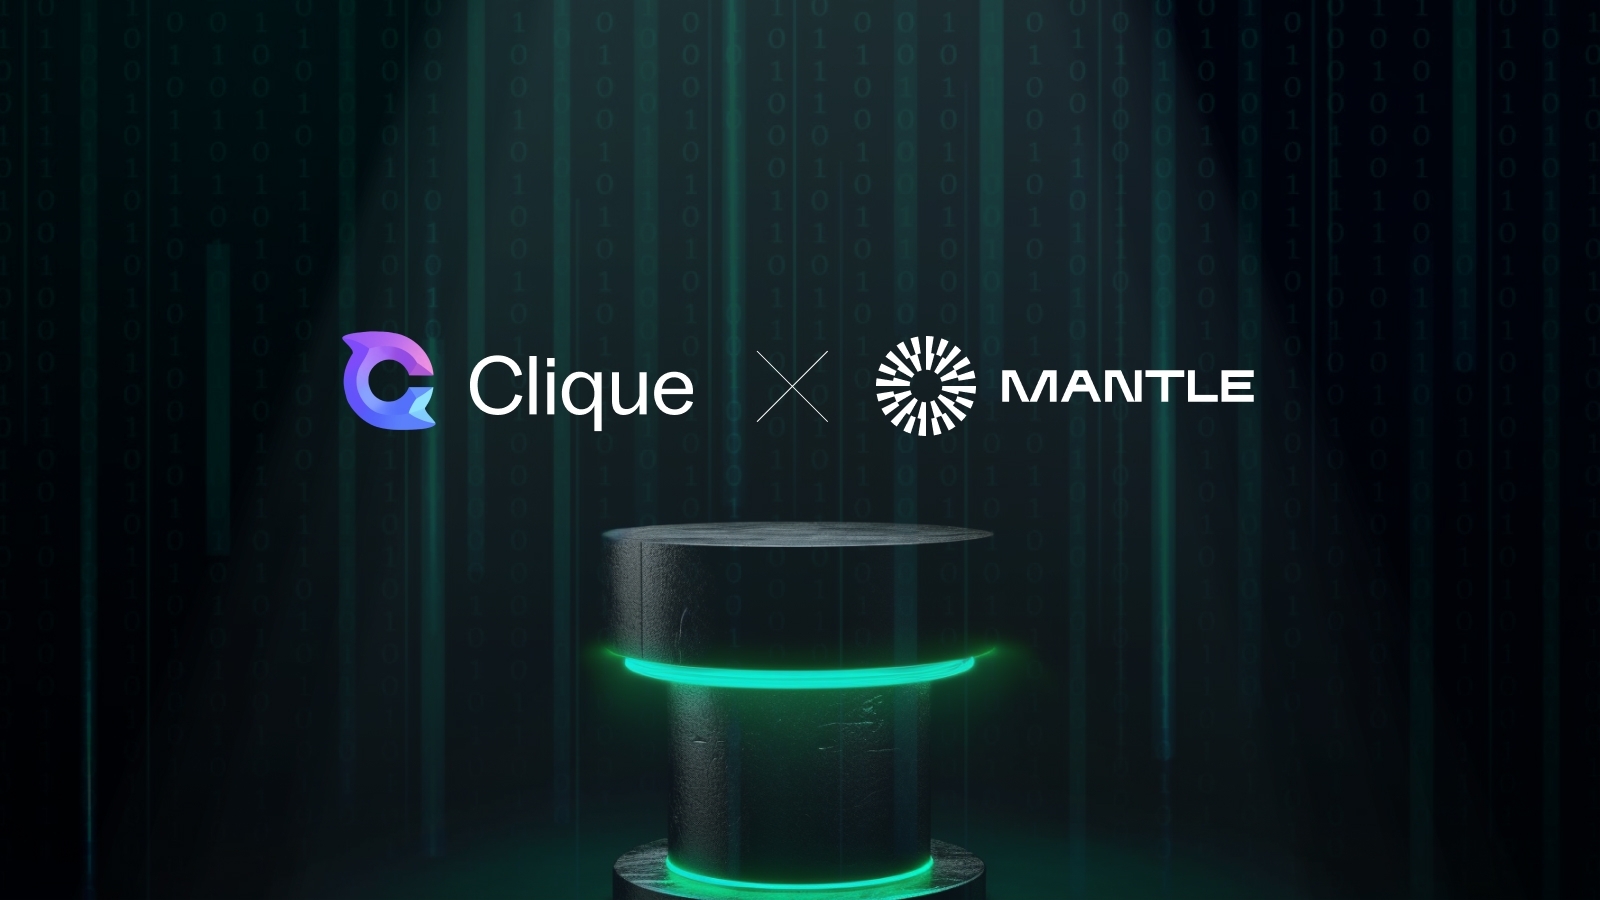 Clique's Identity Oracles & Their Place Within Mantle Ecosystem